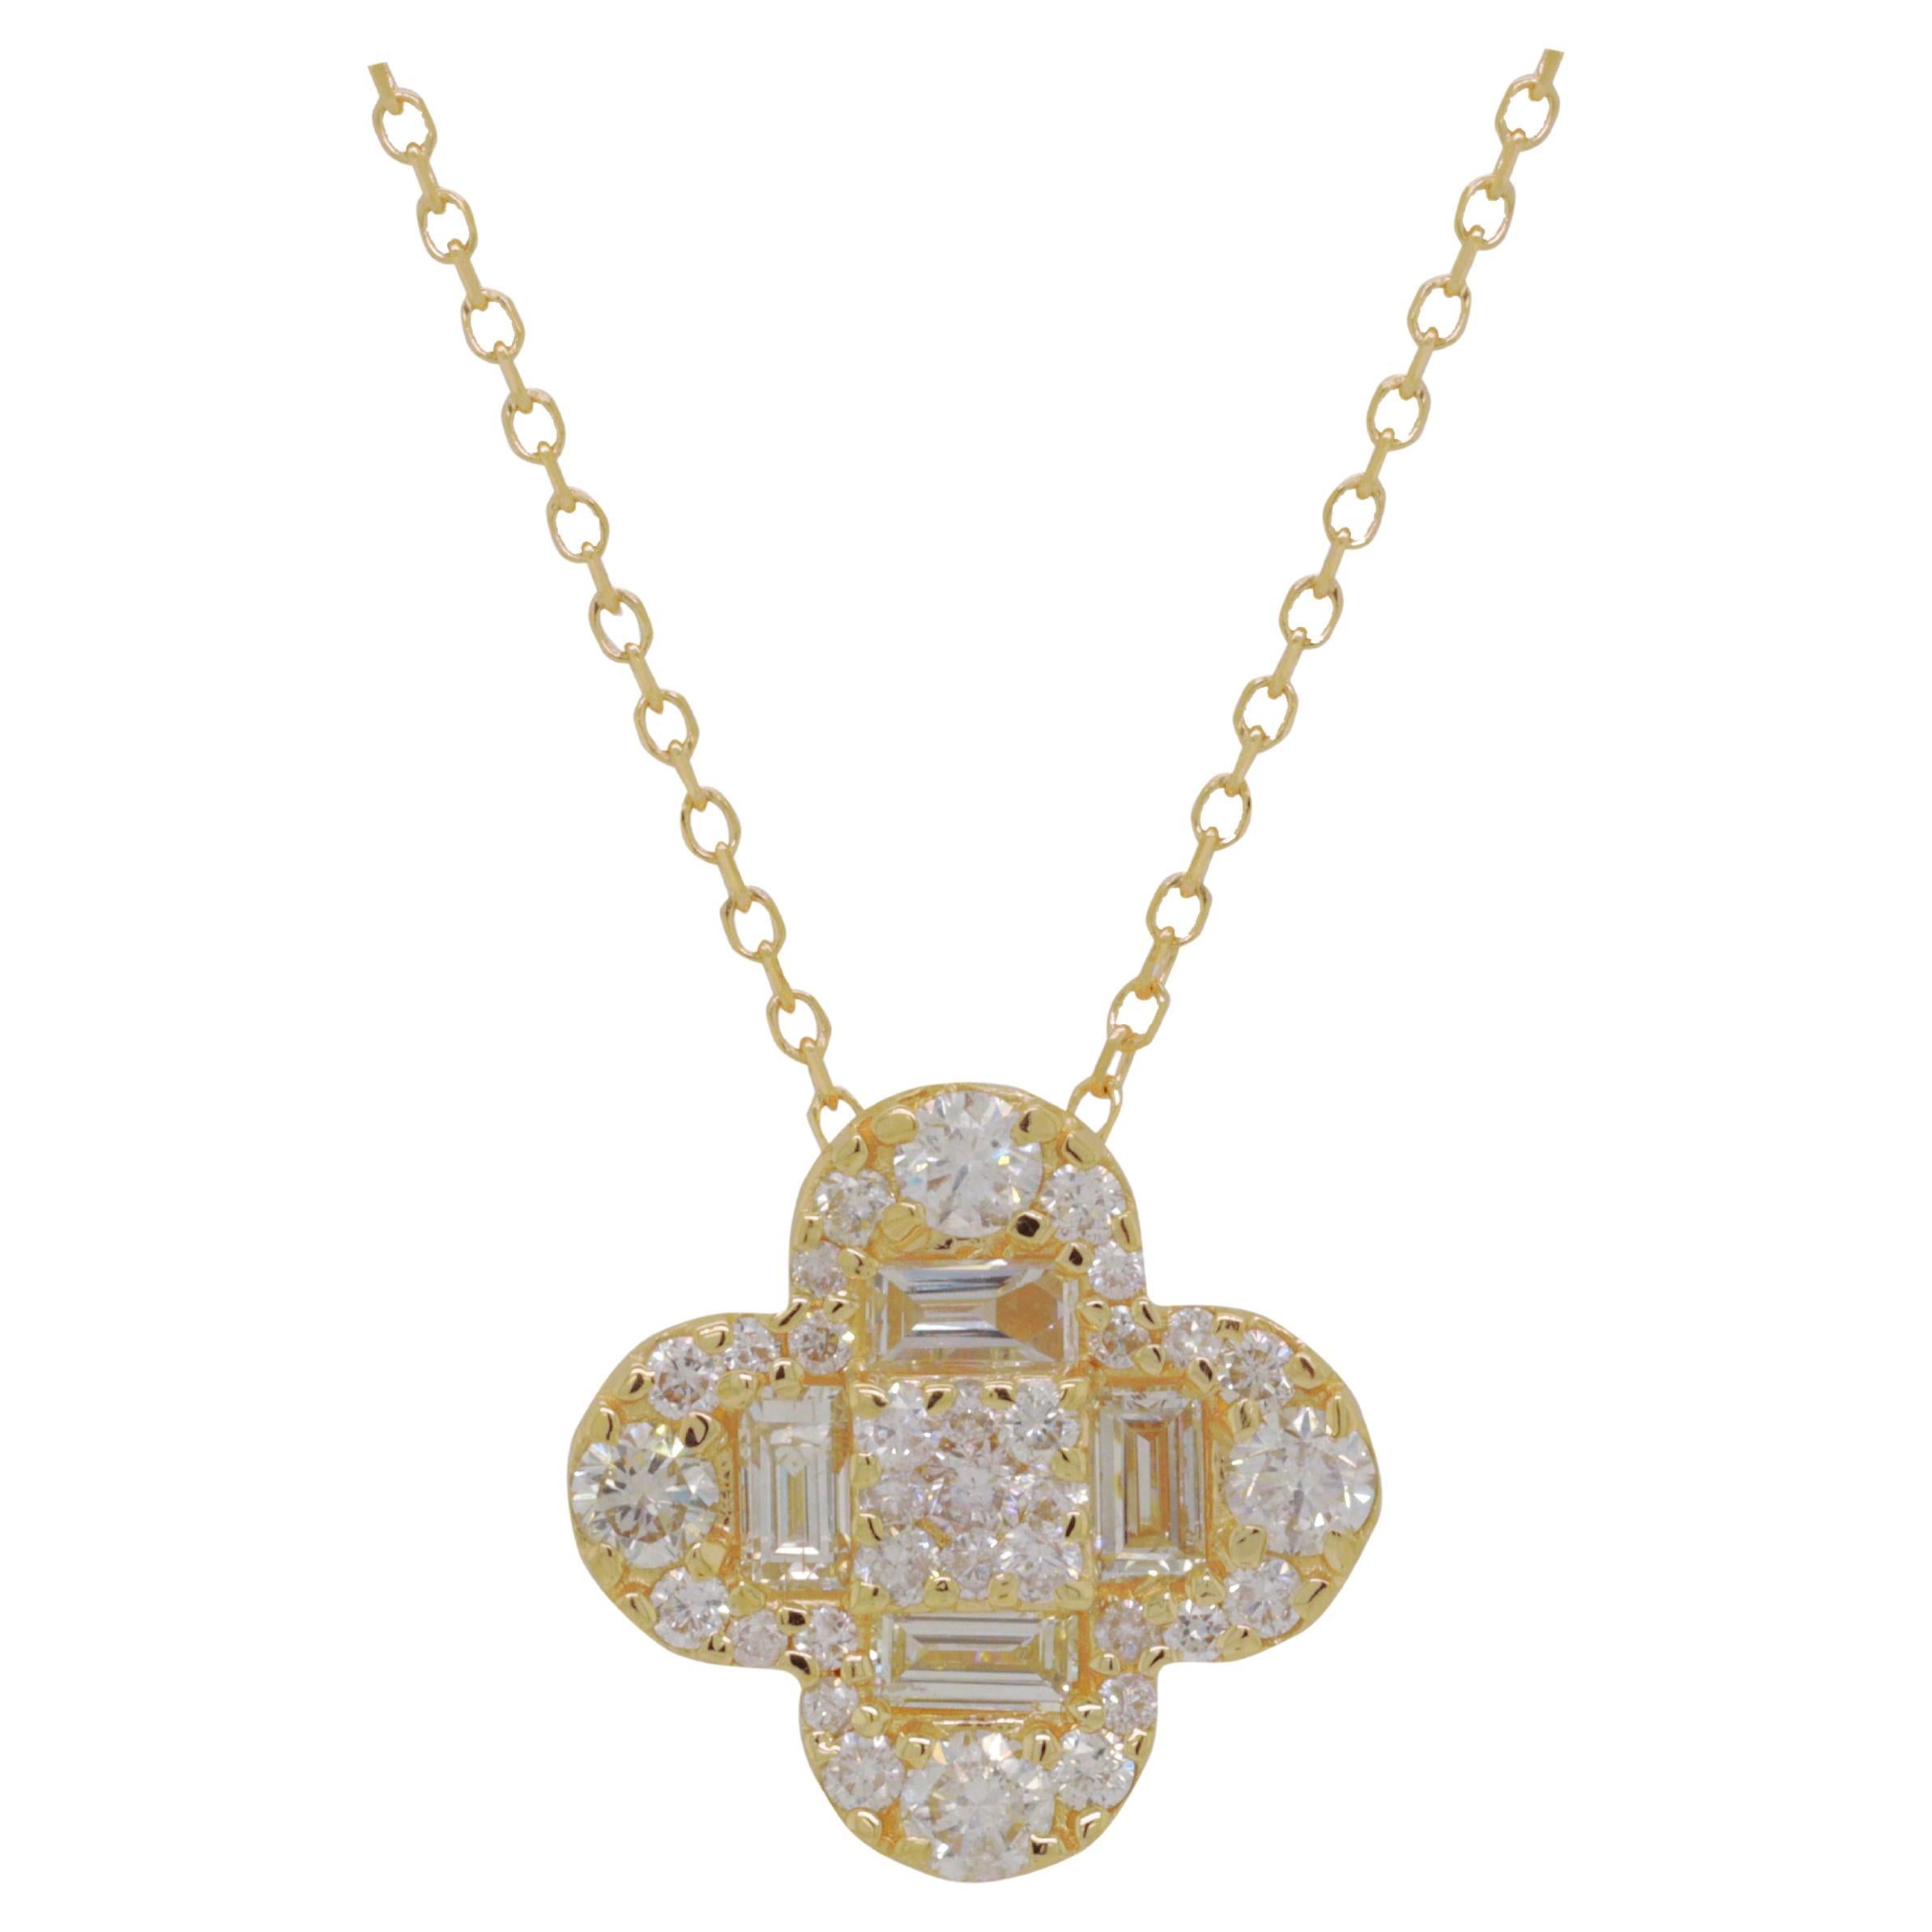 Diana M. 14 kt yellow gold diamond pendant with clover-shaped design 